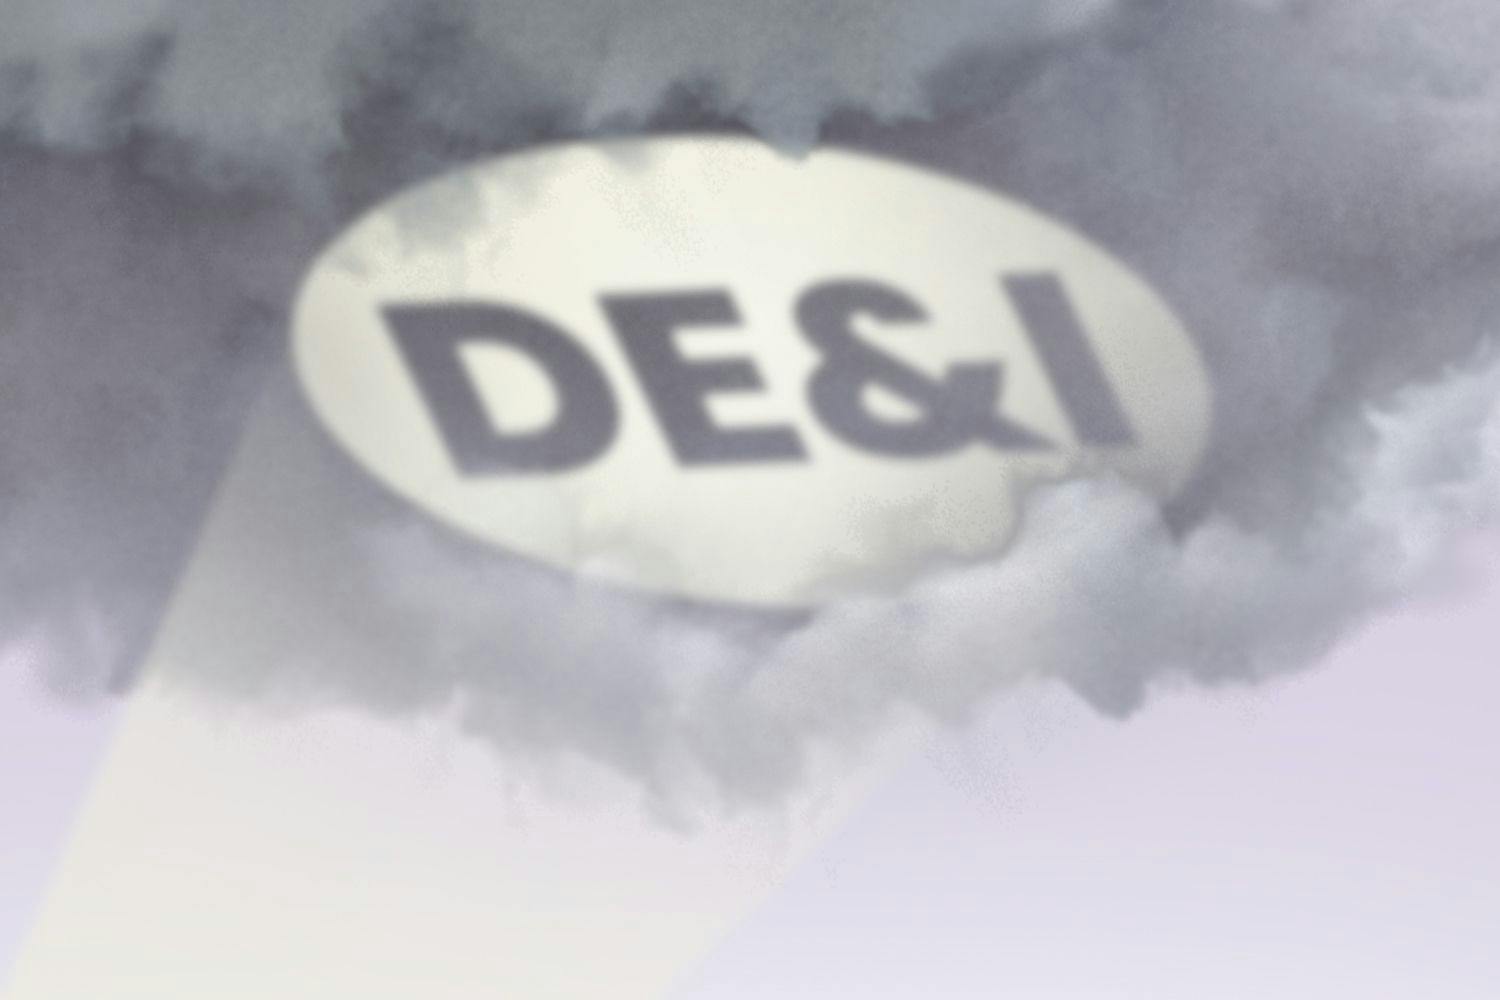 A bat signal shining on a dark cloud with the letters "DE&I" 